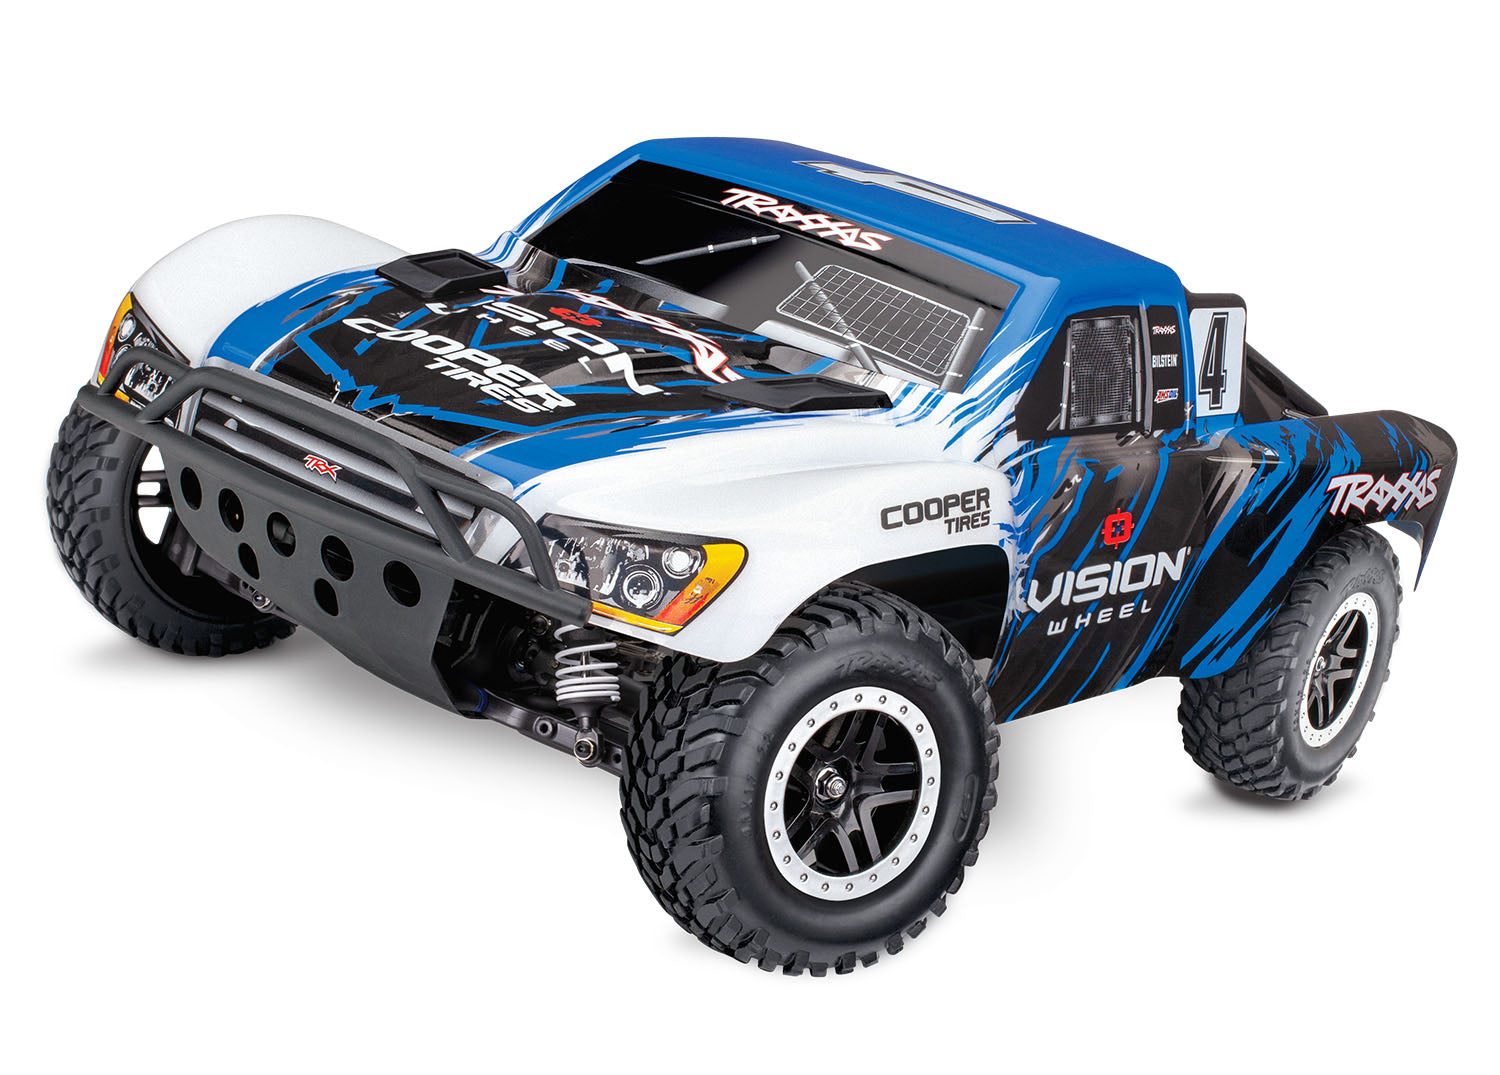 Vision Slash® 4X4 VXL: 1/10 Scale 4WD Brushless Short Course Truck with TQi™ Traxxas Link™ Enabled 2.4GHz Radio System and Traxxas Stability Management (TSM)®